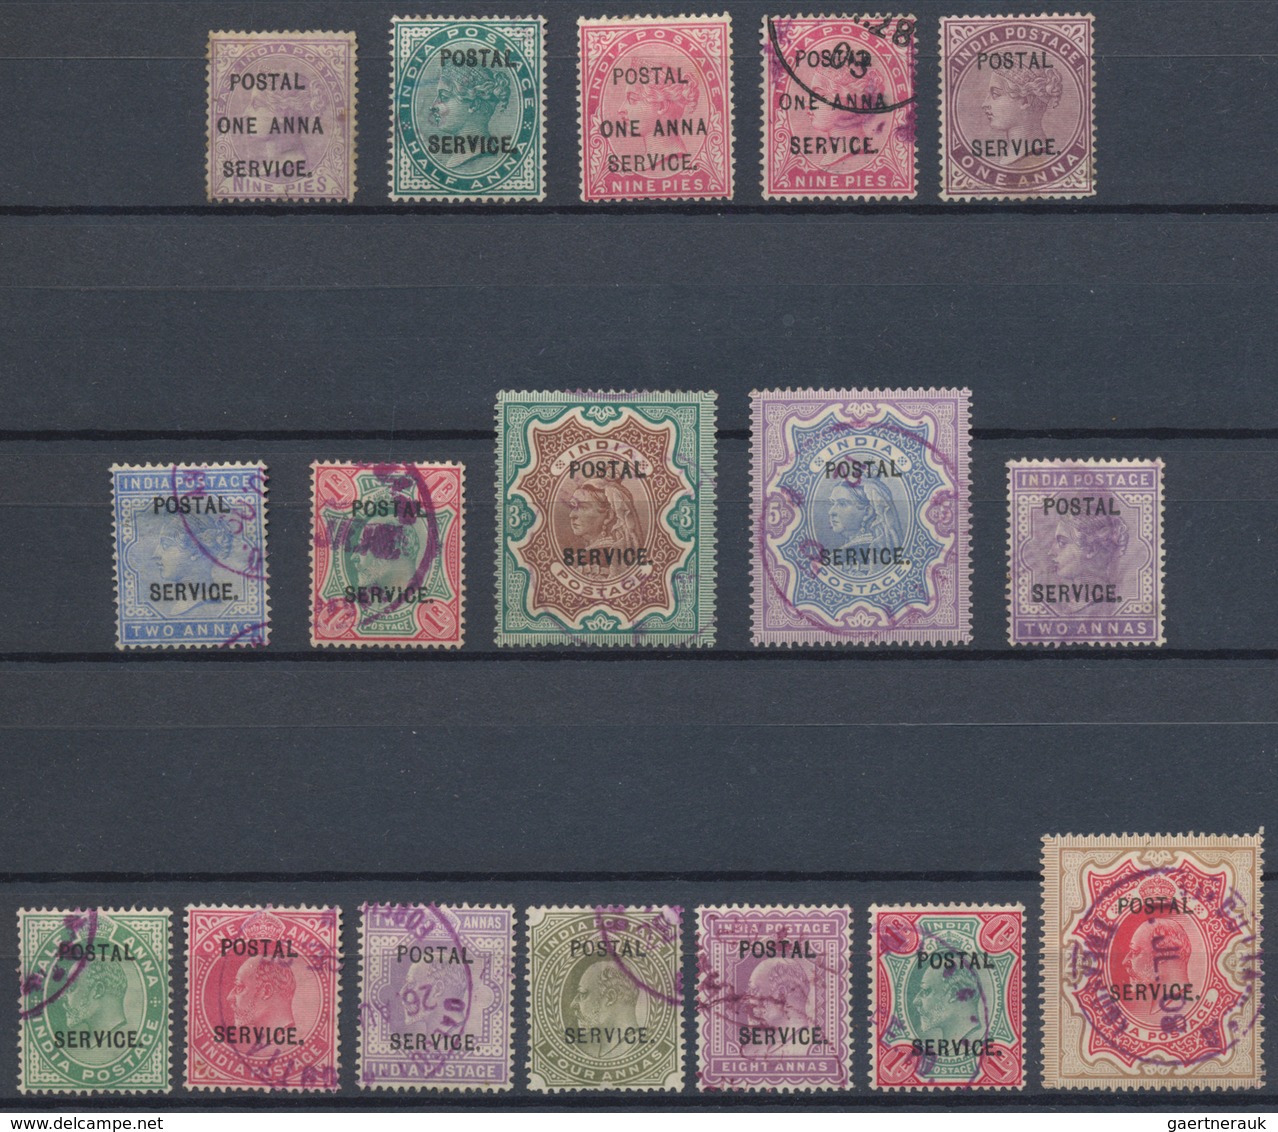 Indien: 1854-2007: Comprehensive collection of mostly used stamps in two big stockbooks and on album